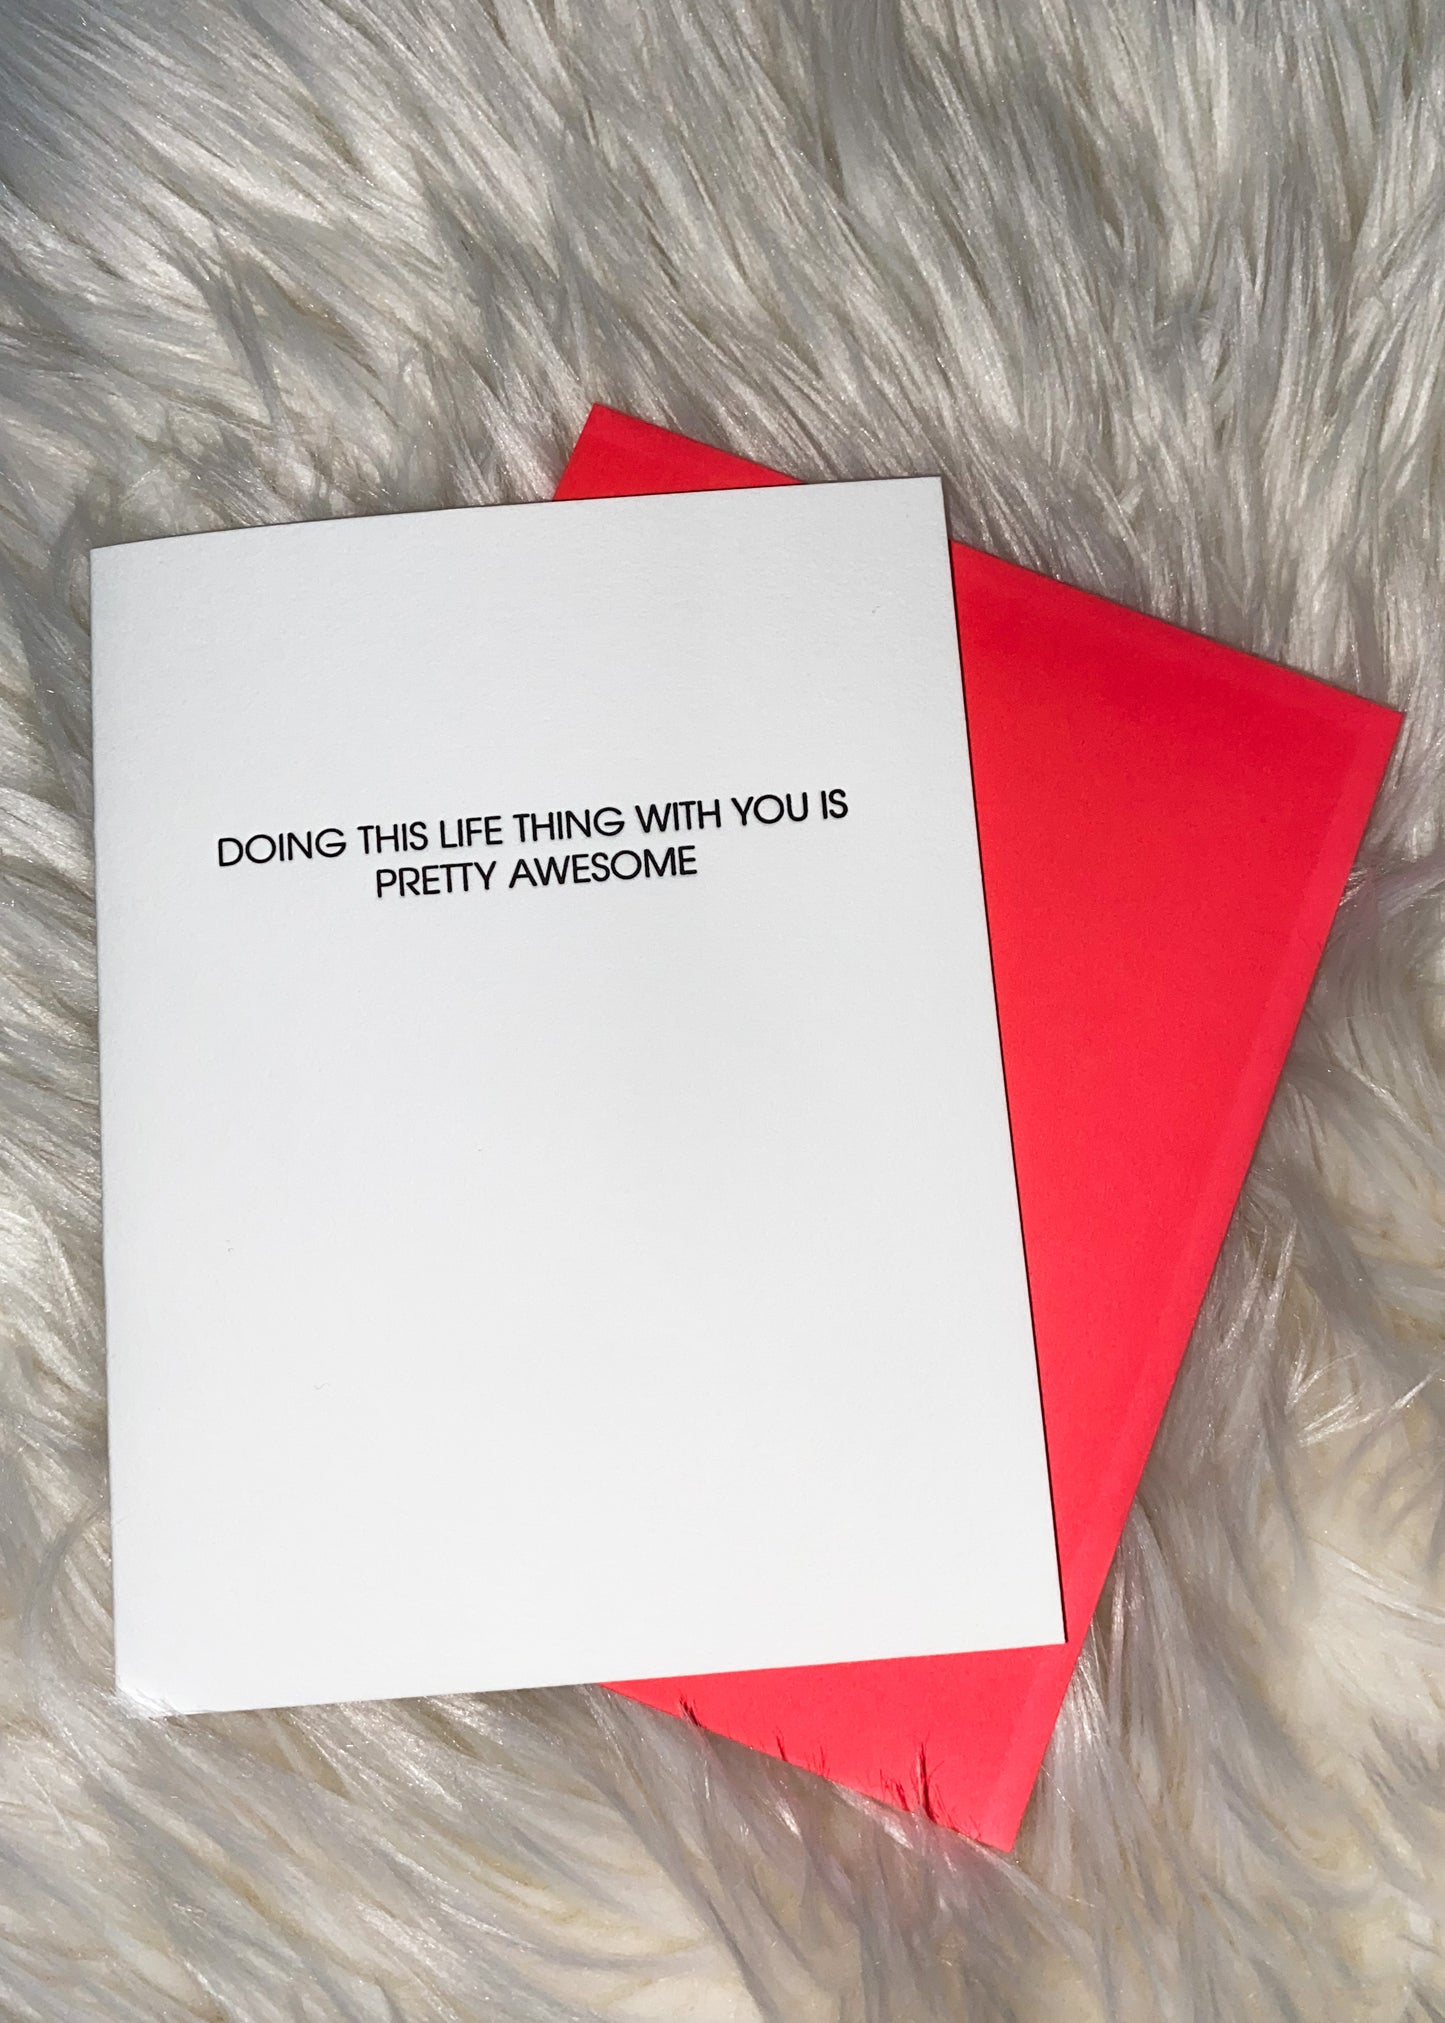 Doing This Life With You Is Awesome Card